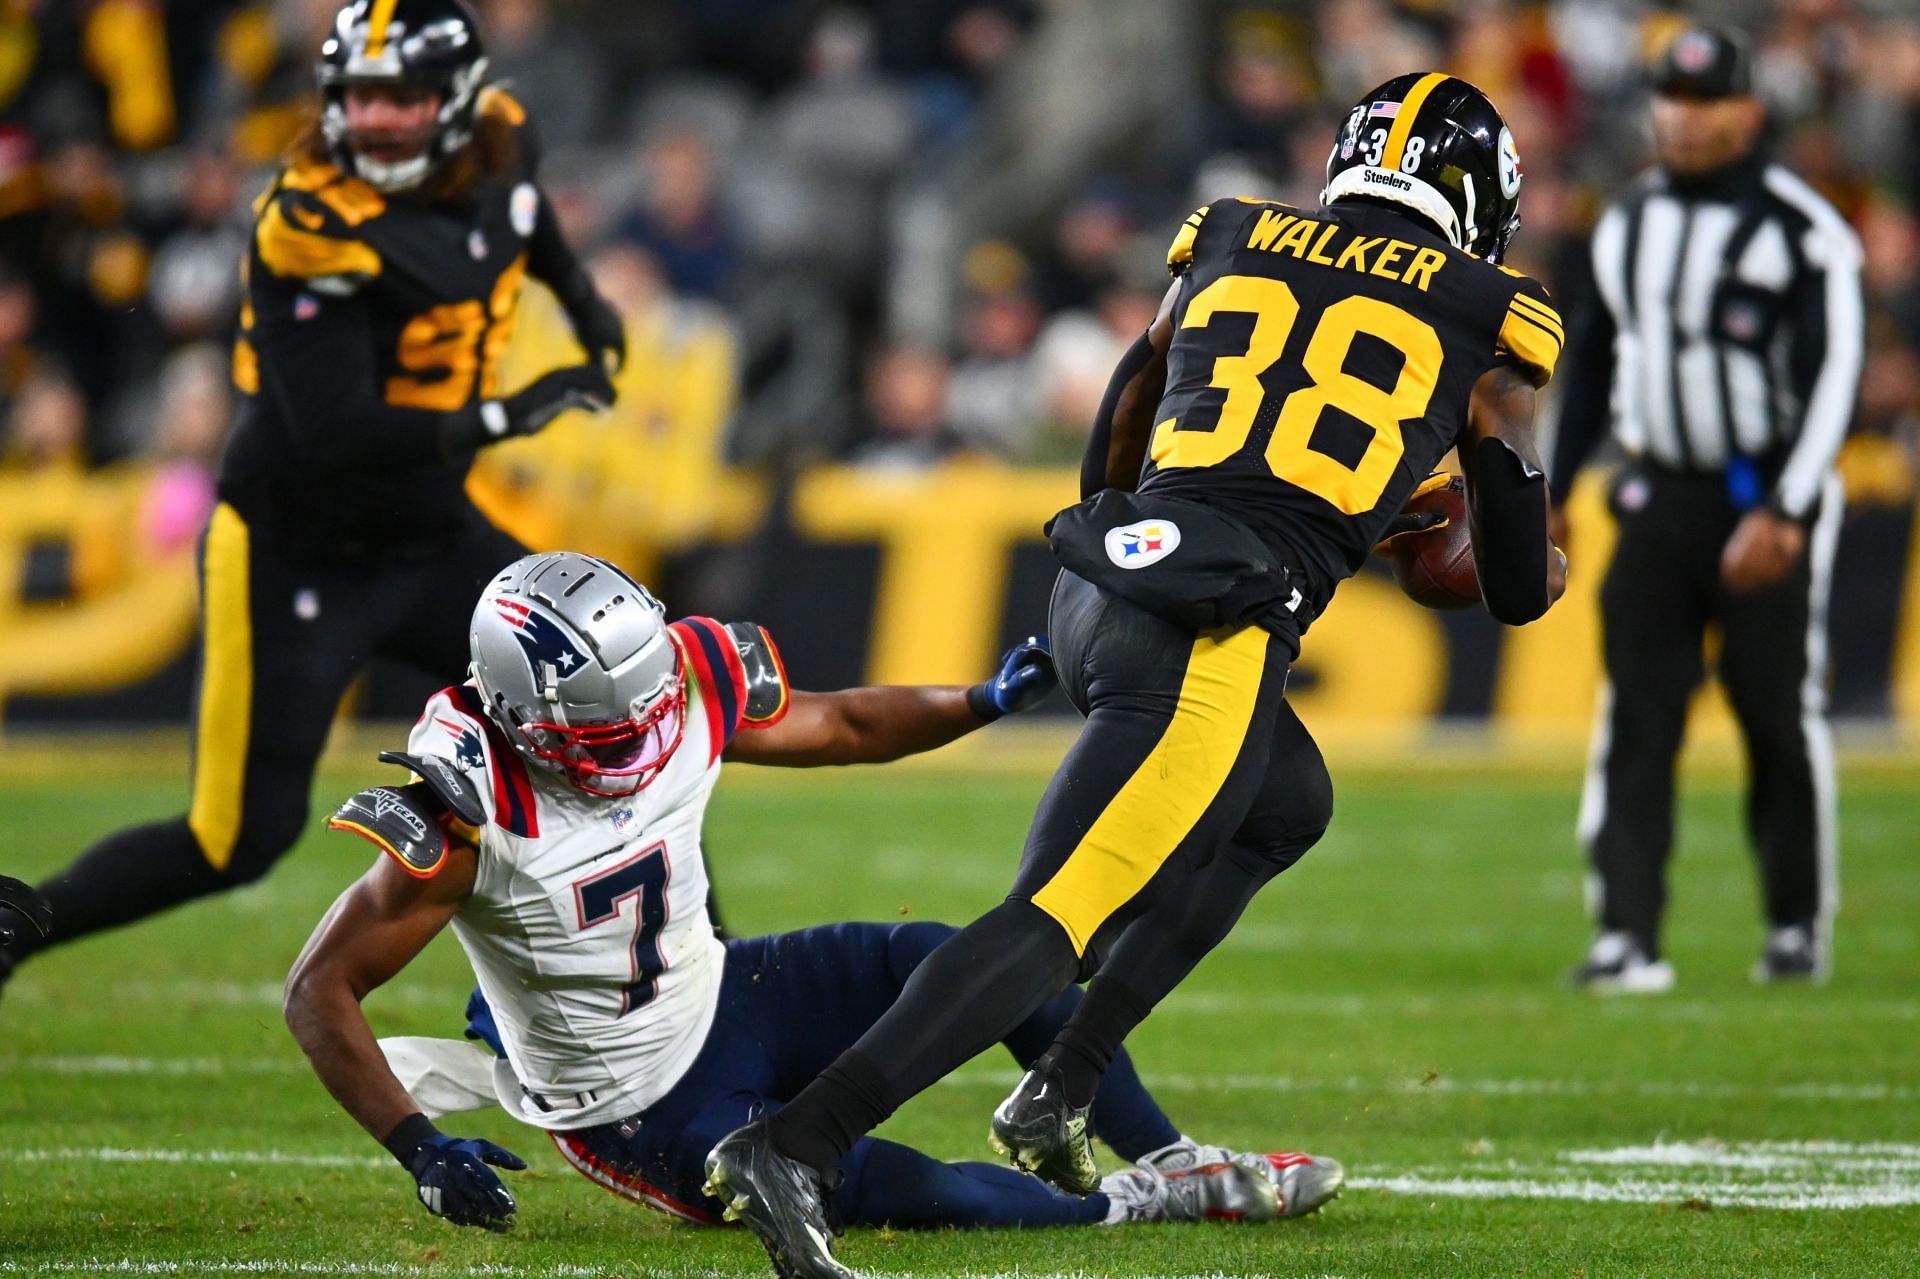 Juju Smith-Schuster at New England Patriots v Pittsburgh Steelers